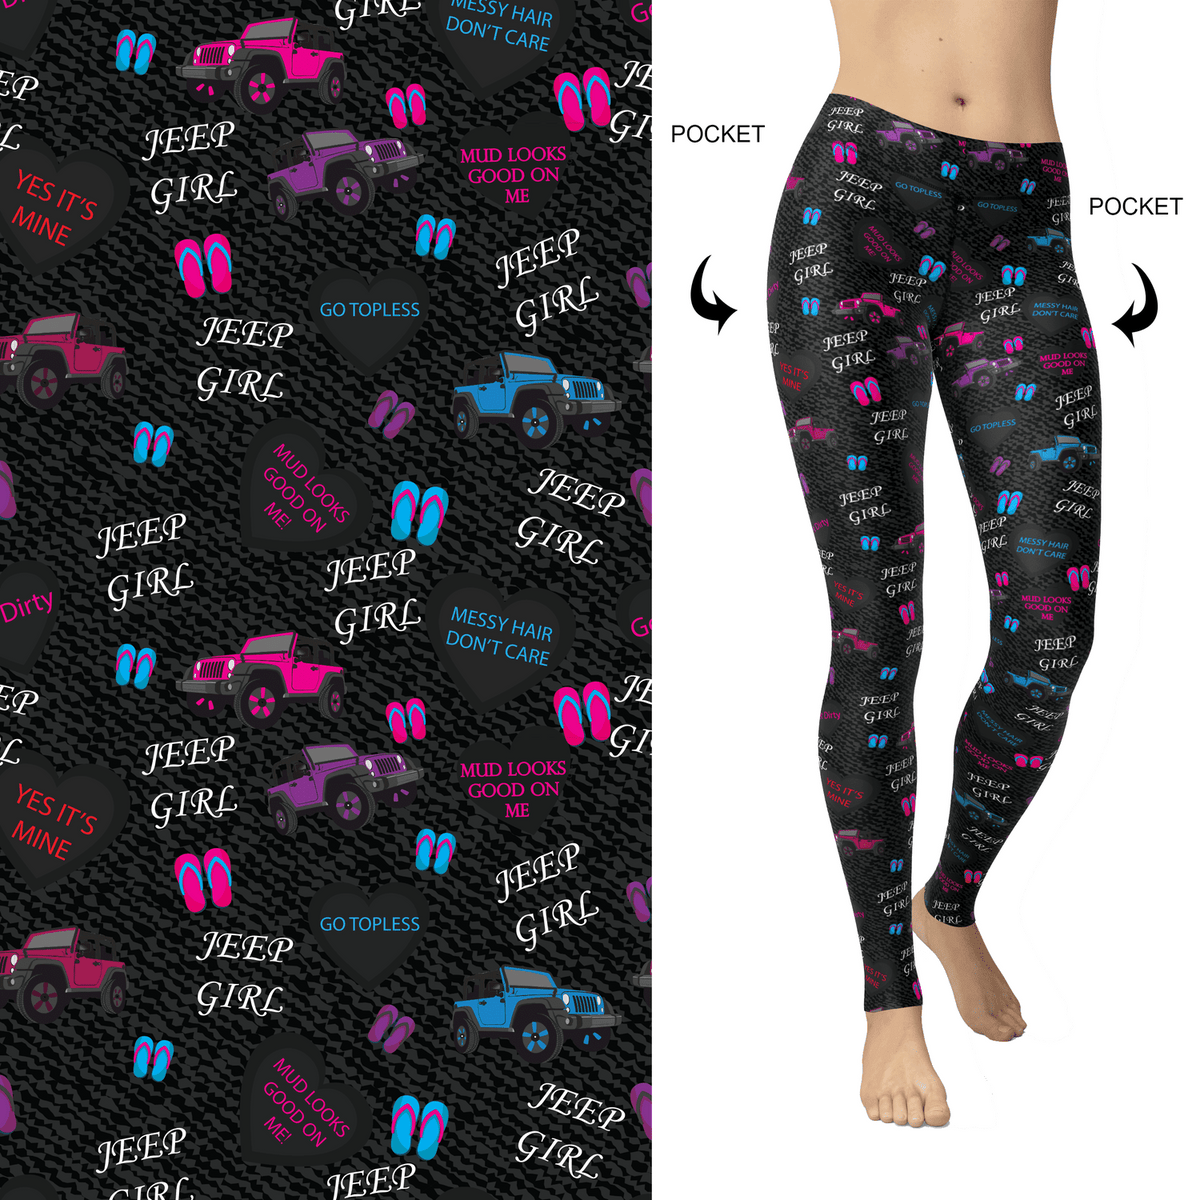 Jeeper Girl Black Leggings with Pockets